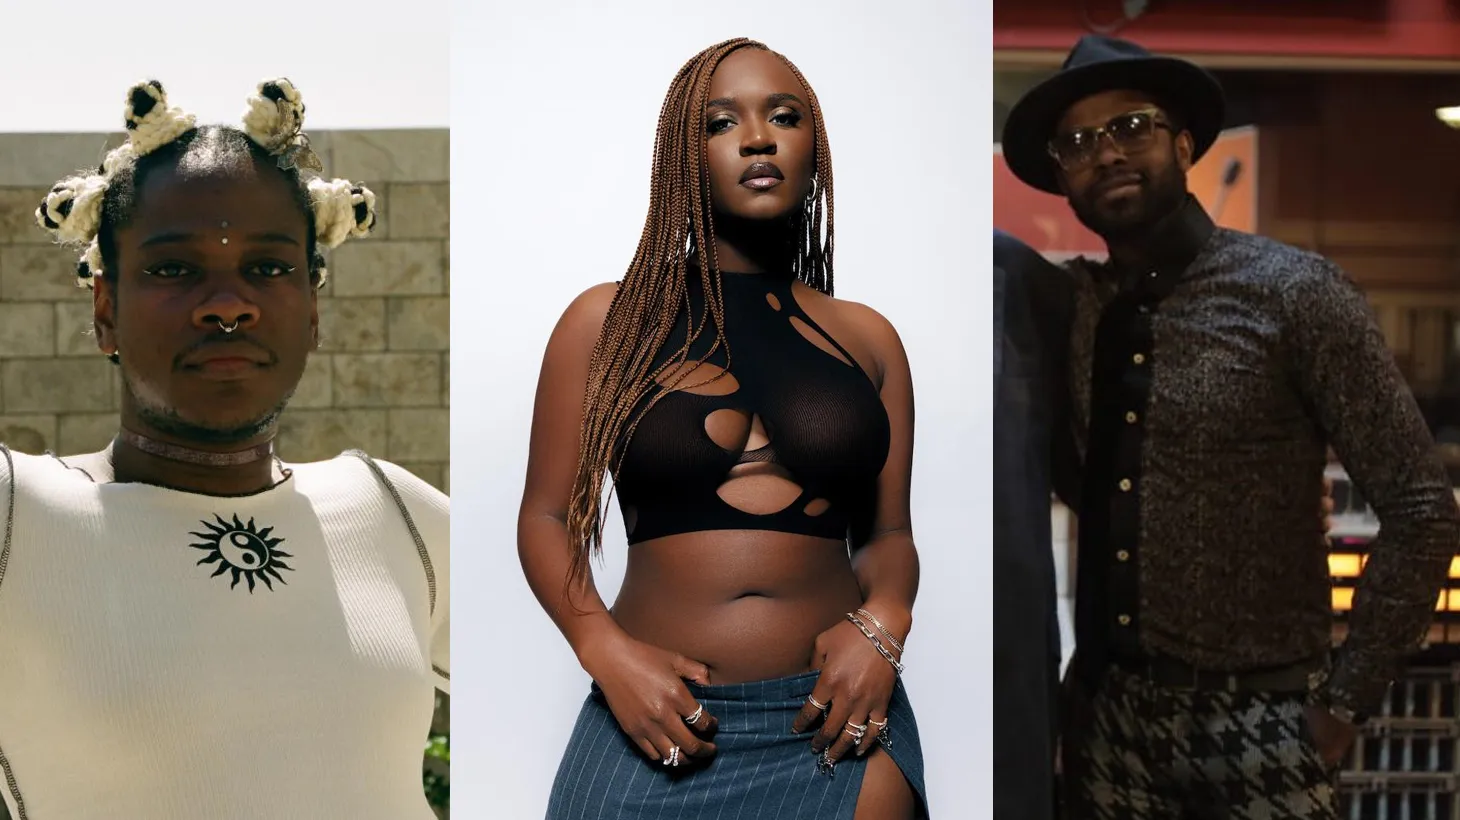 5 Songs to Hear: Luxuriate in the sounds of Shamir, Amaarae, and Adrian Younge.